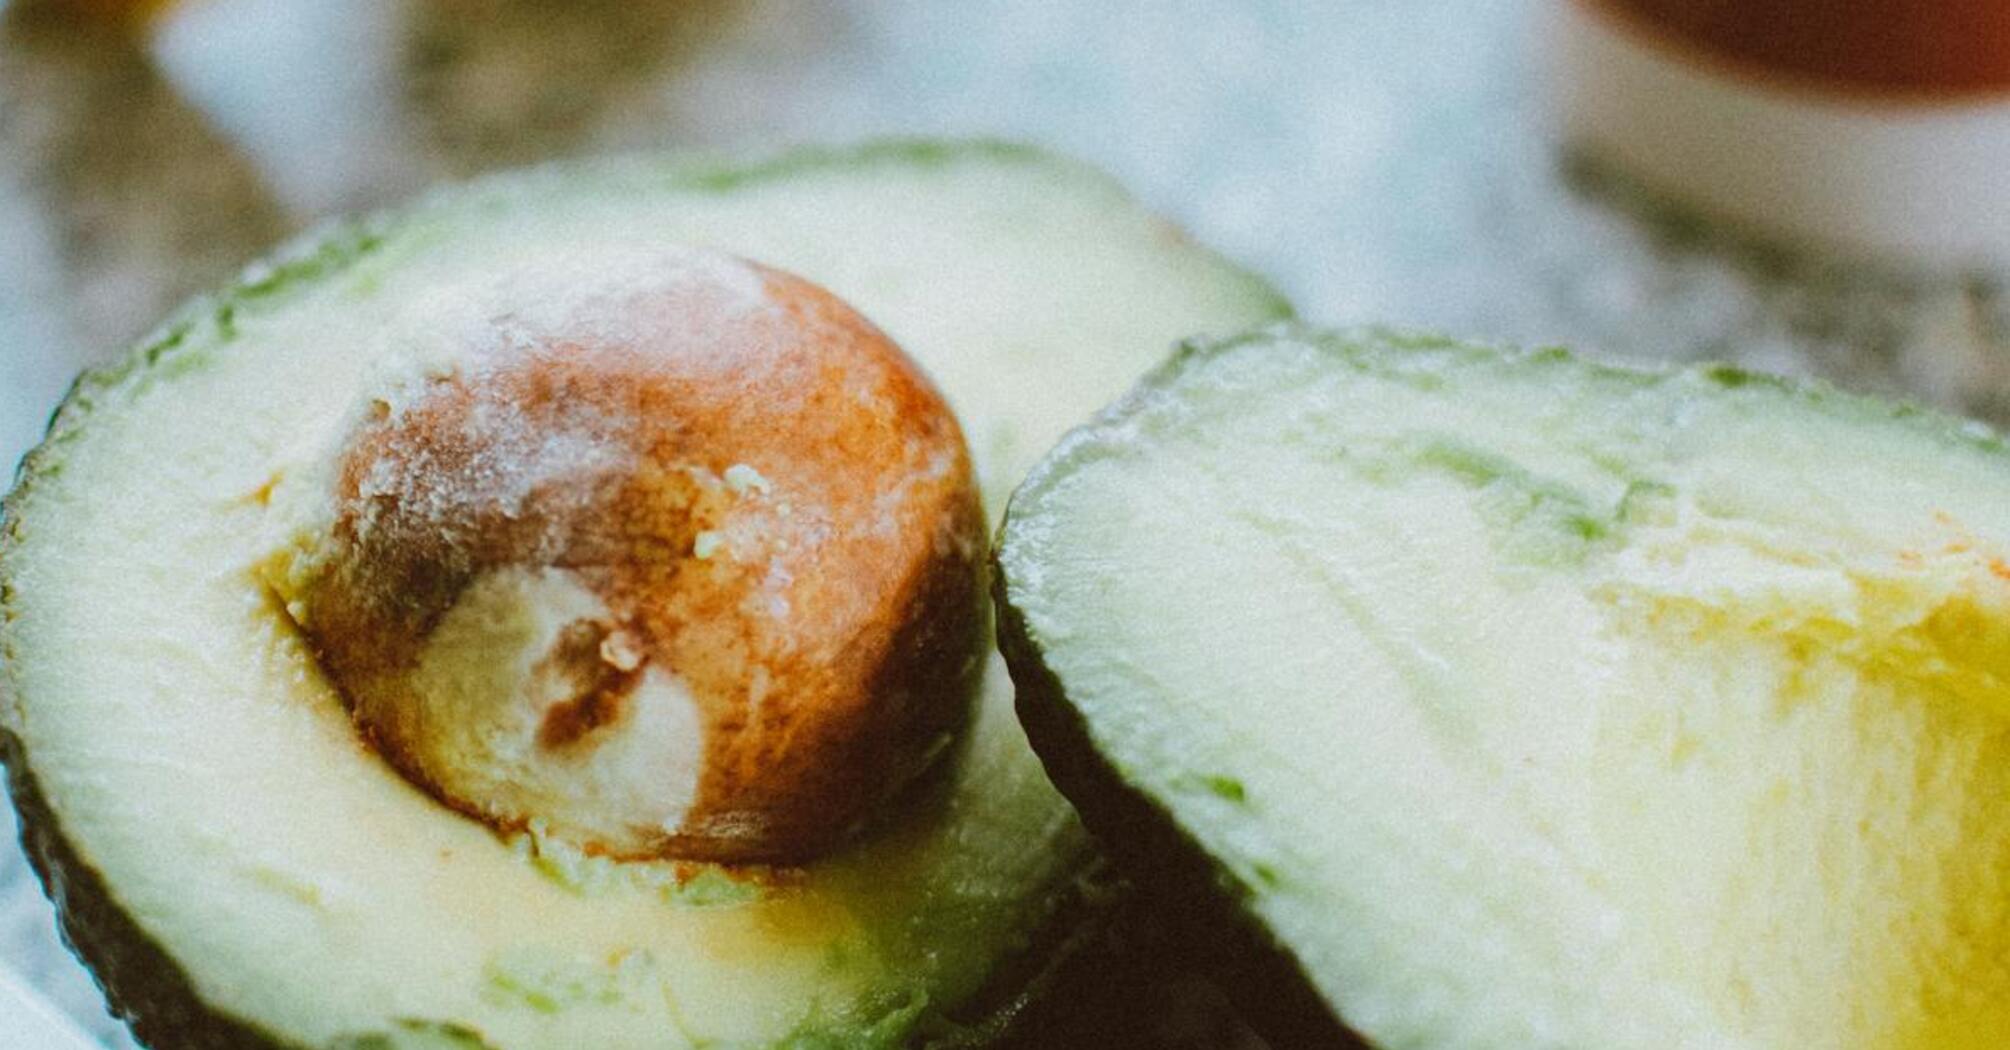 Avocados ripen in just 10 minutes and retain their flavor